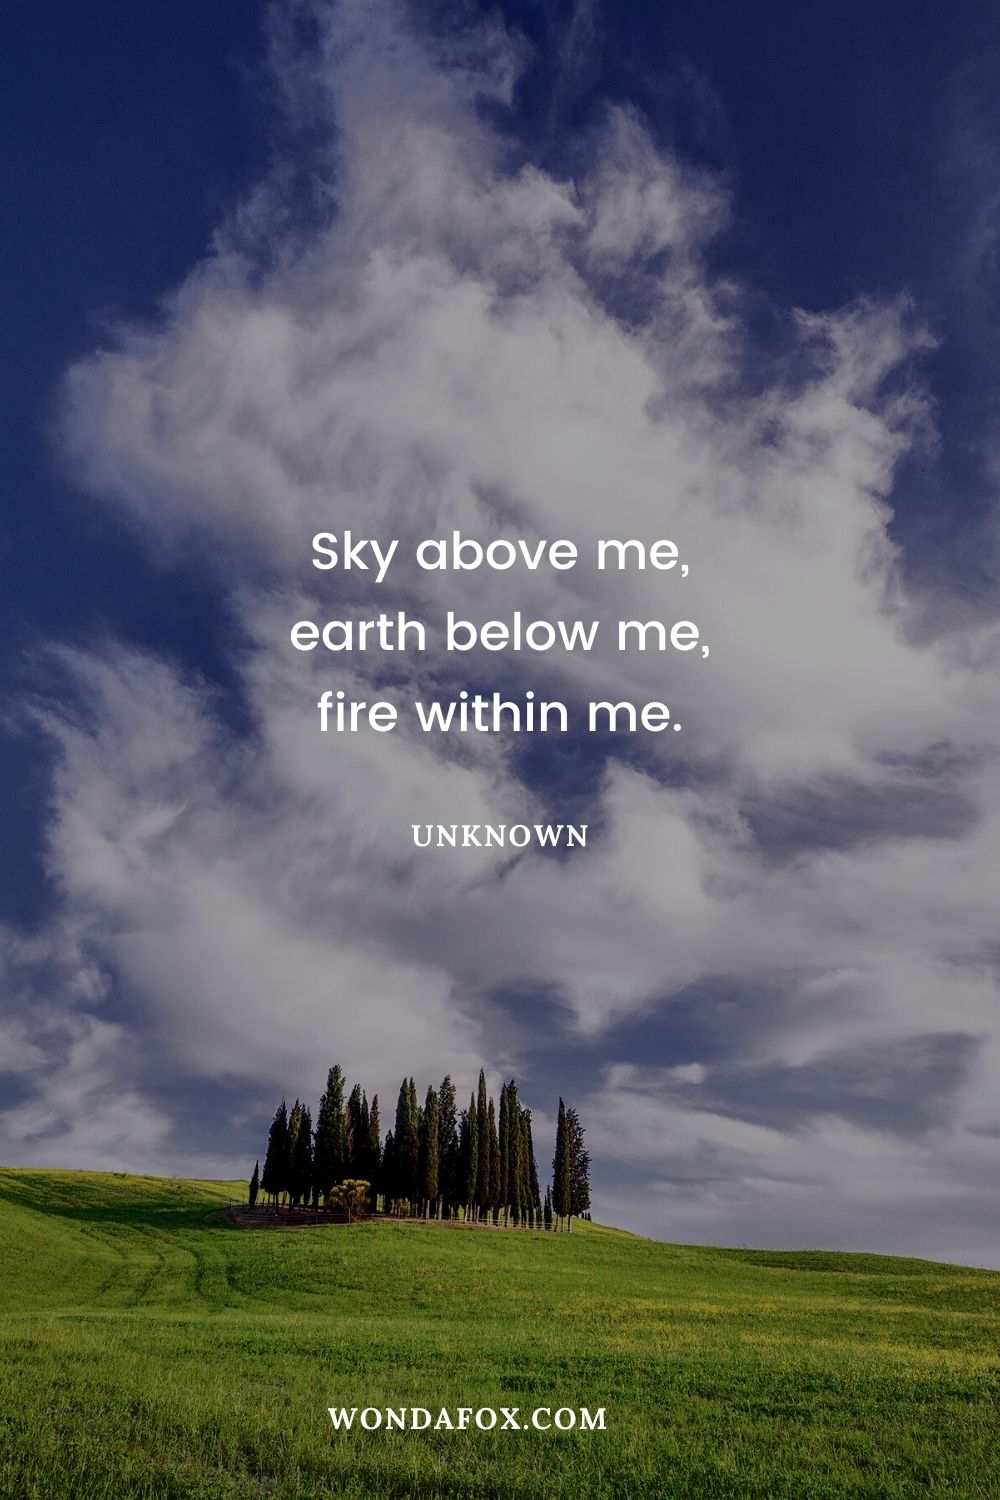 Sky above me, earth below me, fire within me.”